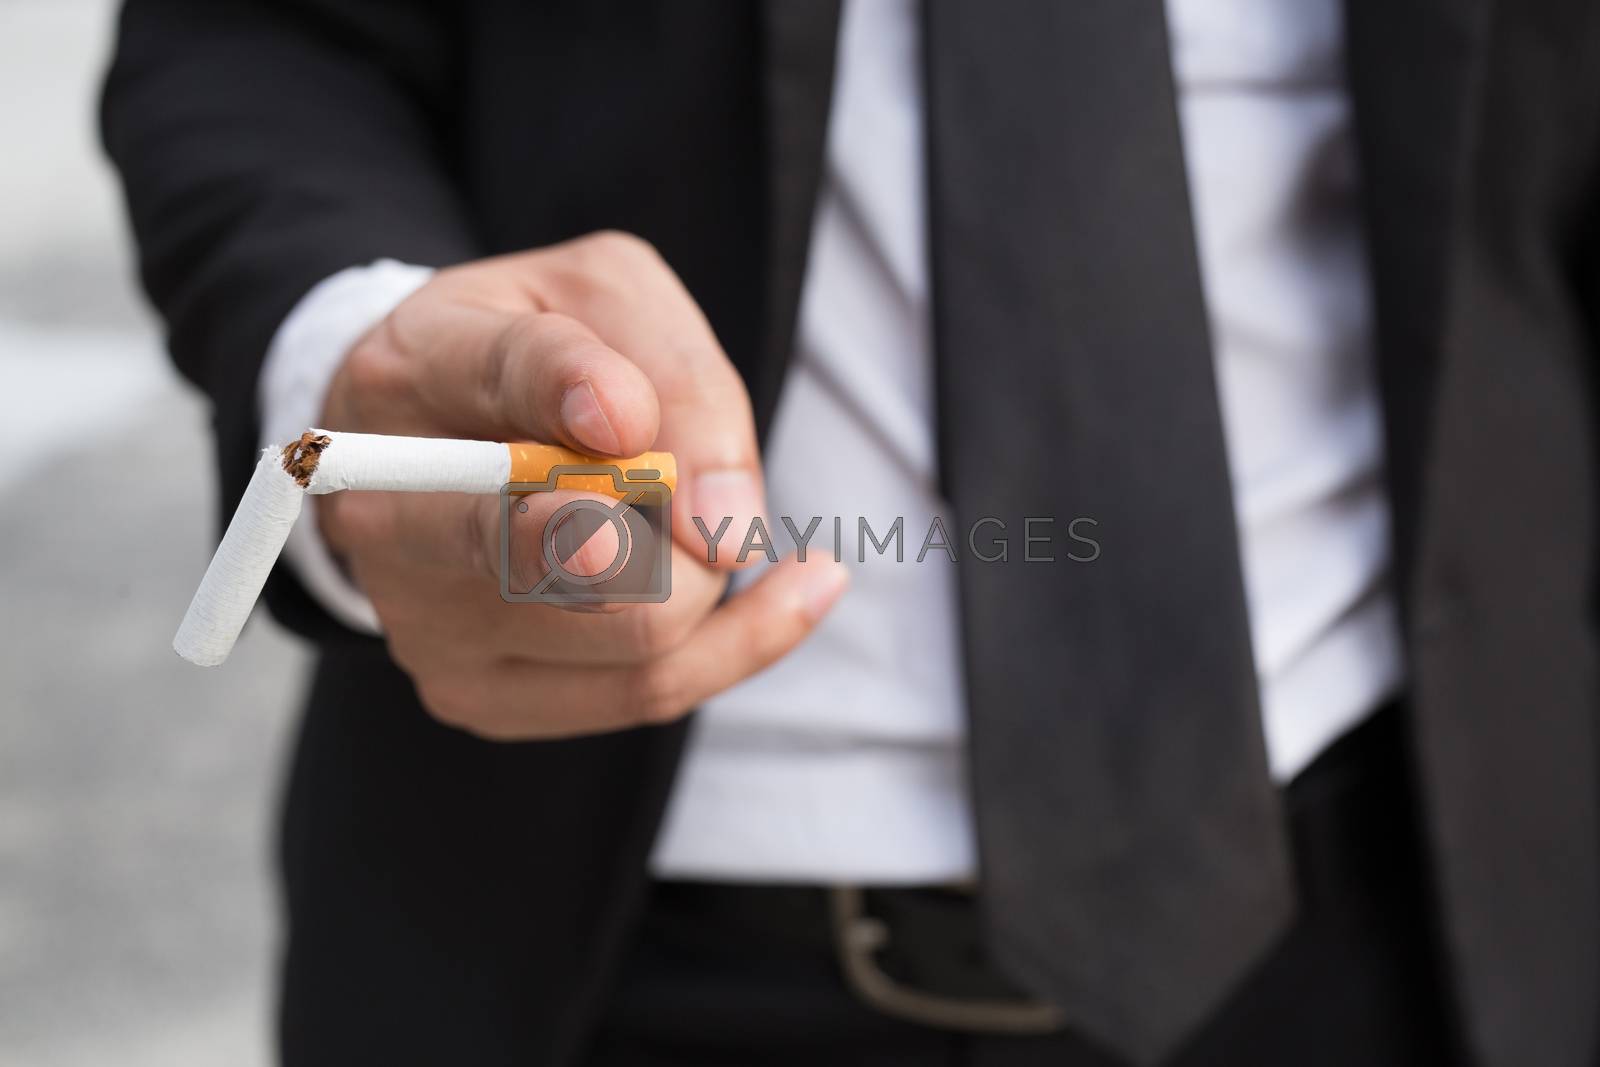 Royalty free image of businessman stand smoking Cigarettes in hand. by boytaro1428@gmail.com